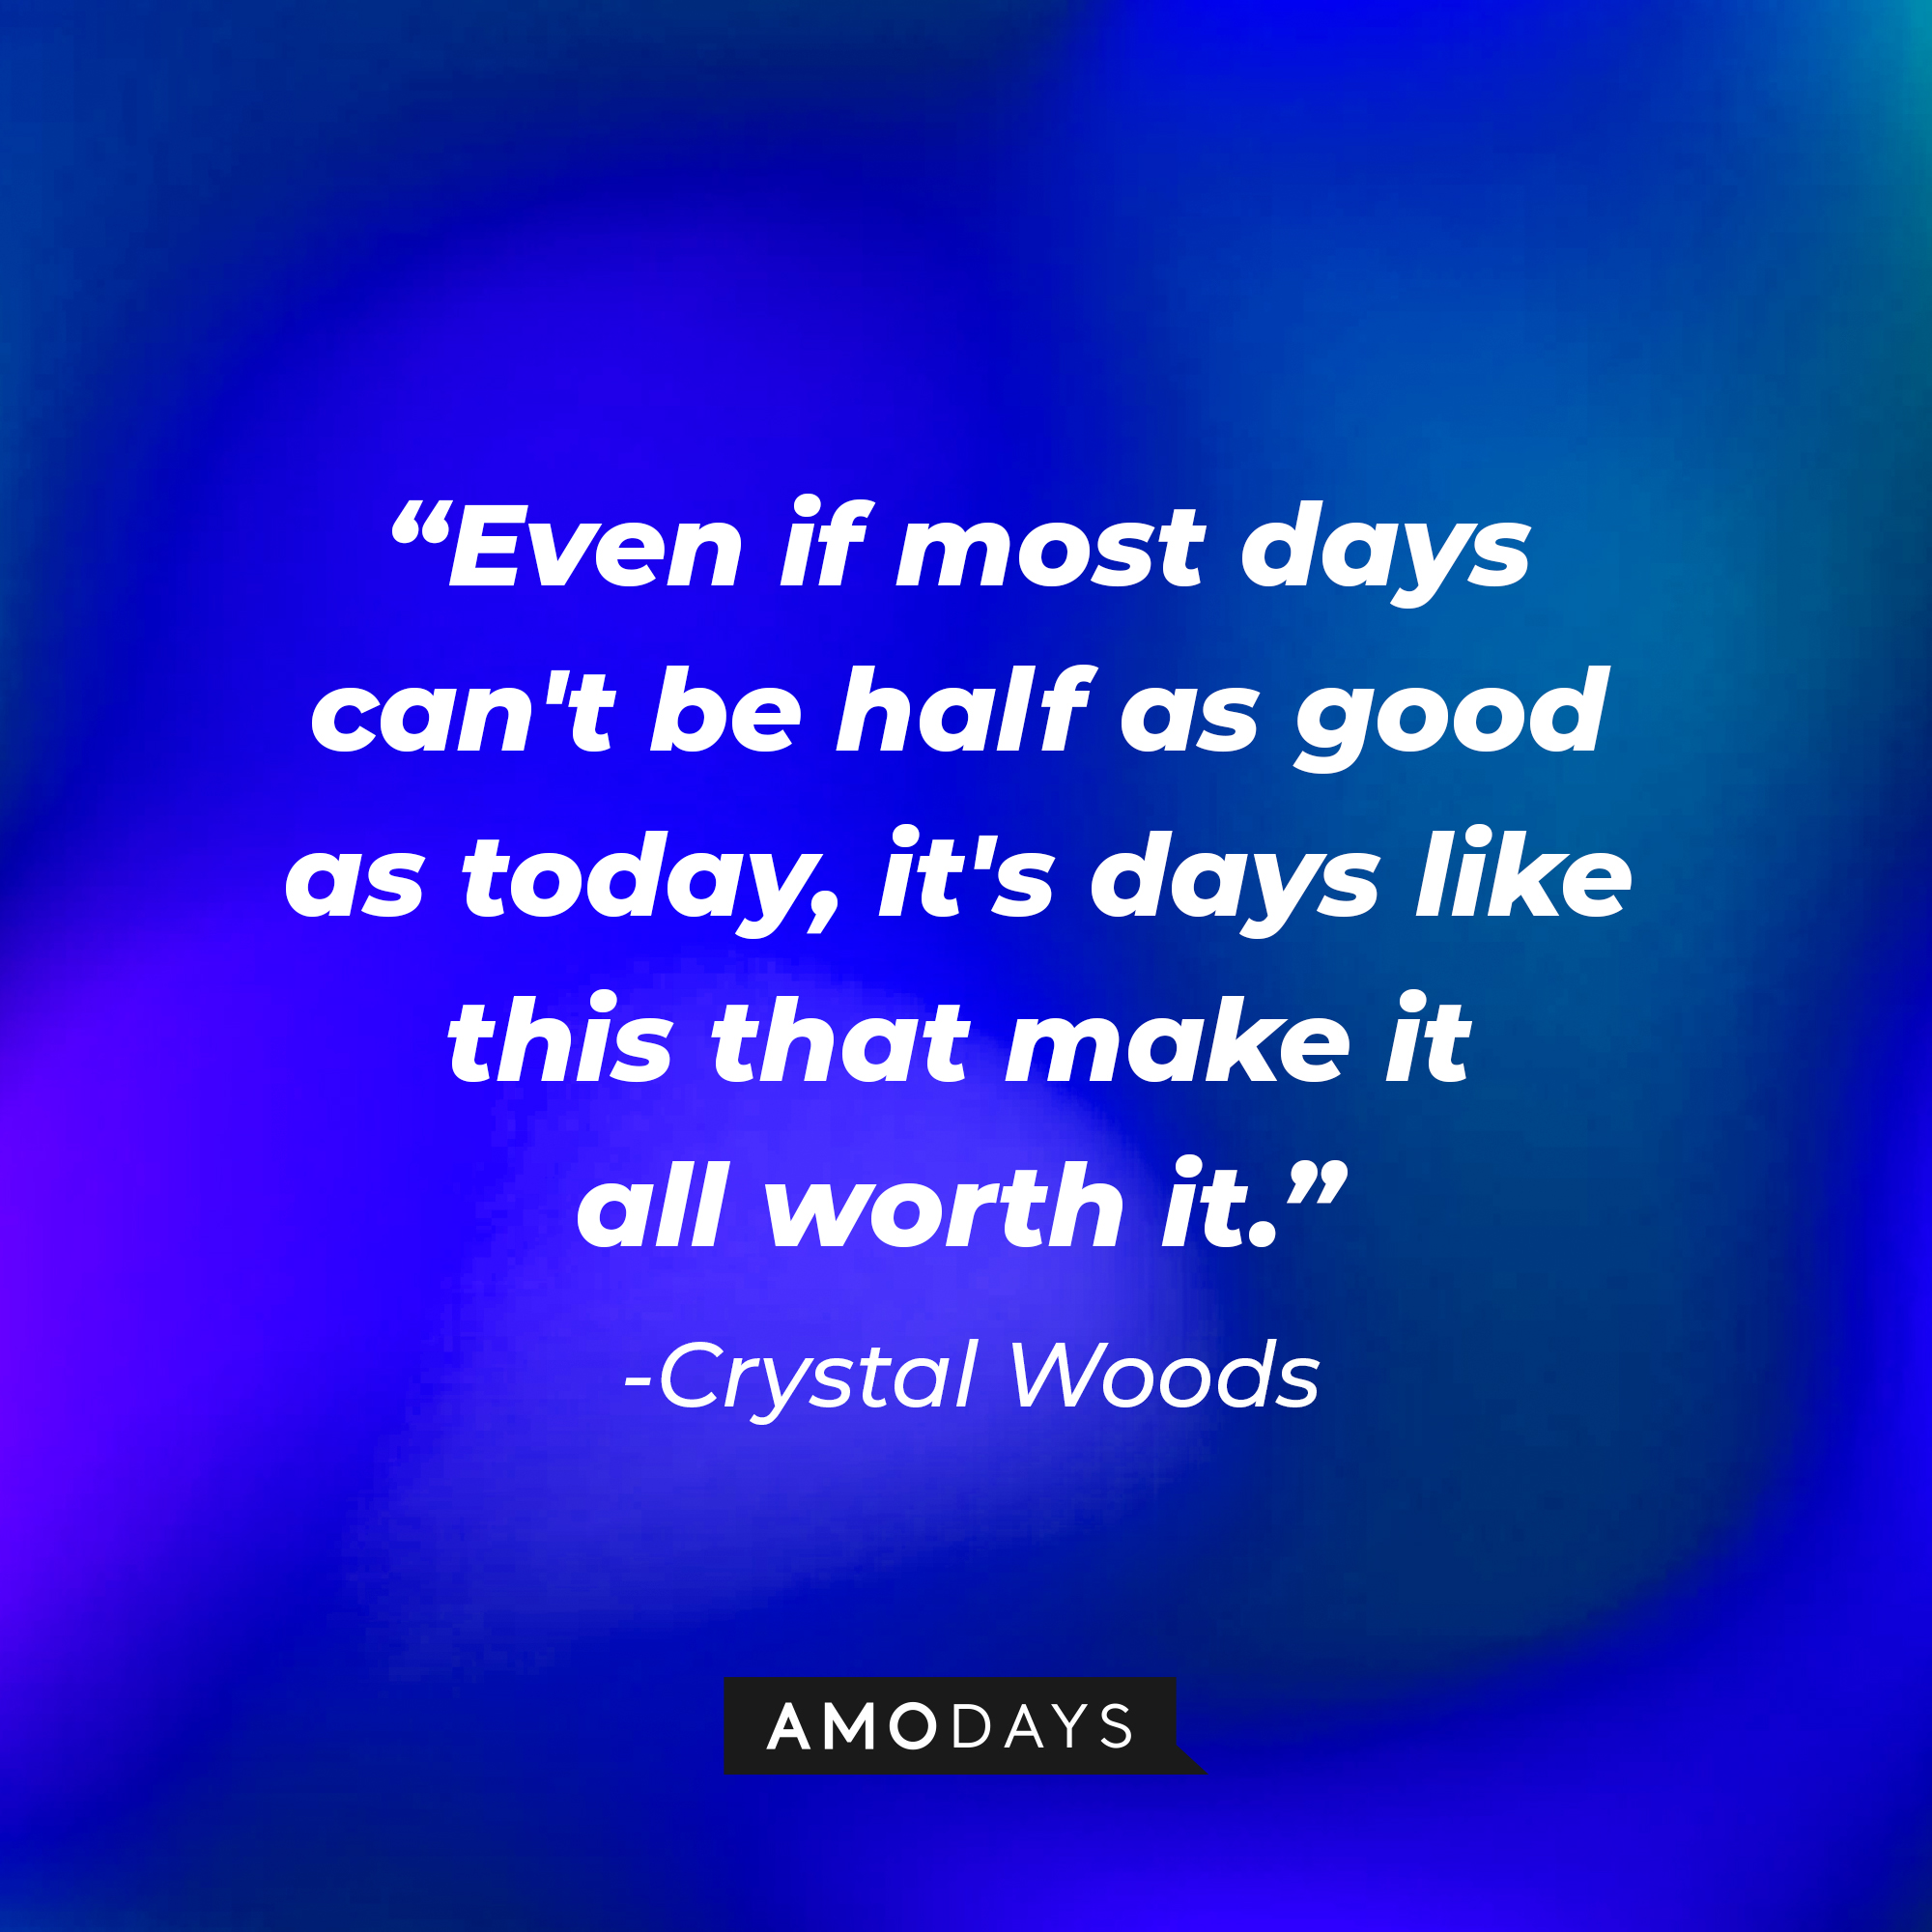 Crystal Woods’ quote: "Even if most days can't be half as good as today, it's days like this that make it all worth it."  | Image: Amodays